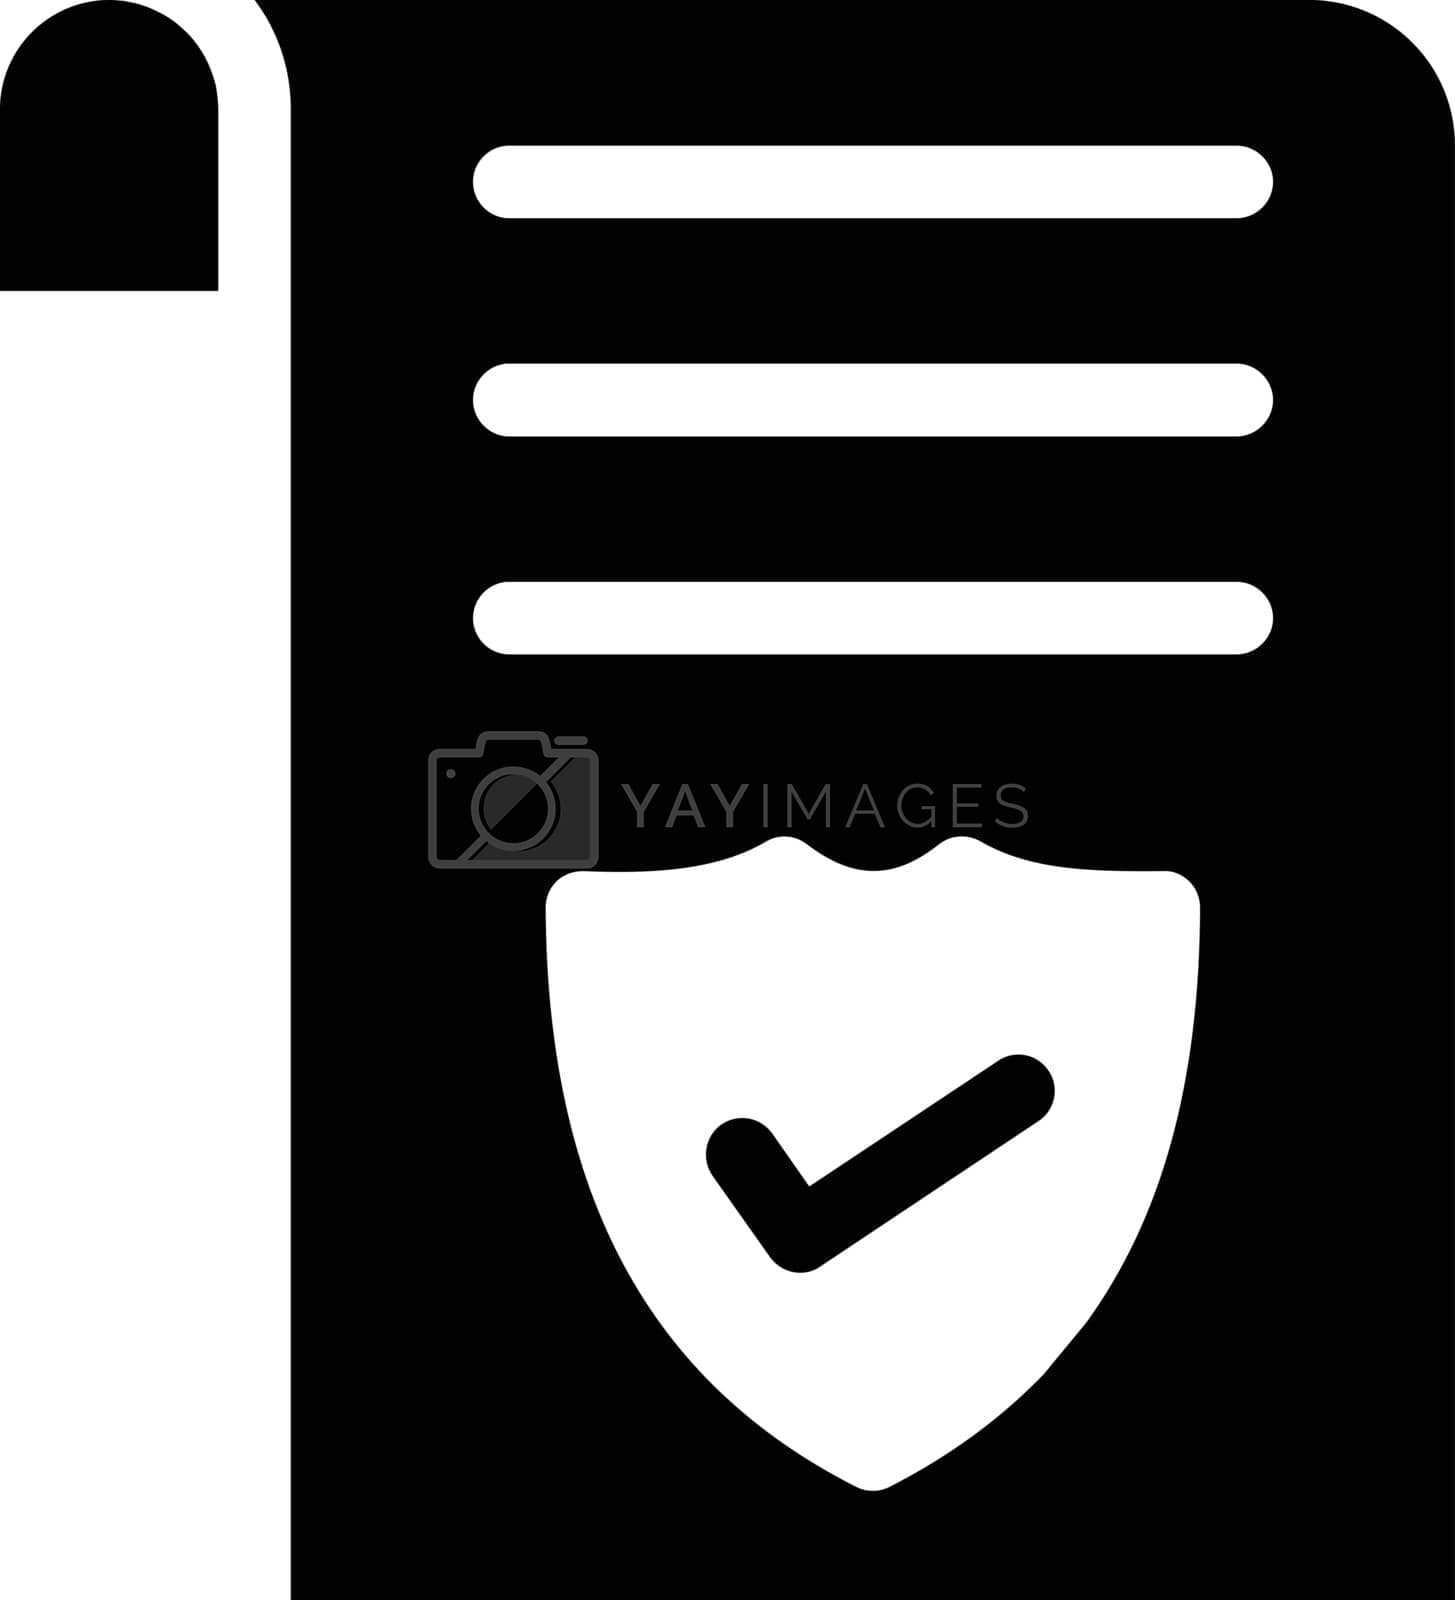 Royalty free image of document by vectorstall